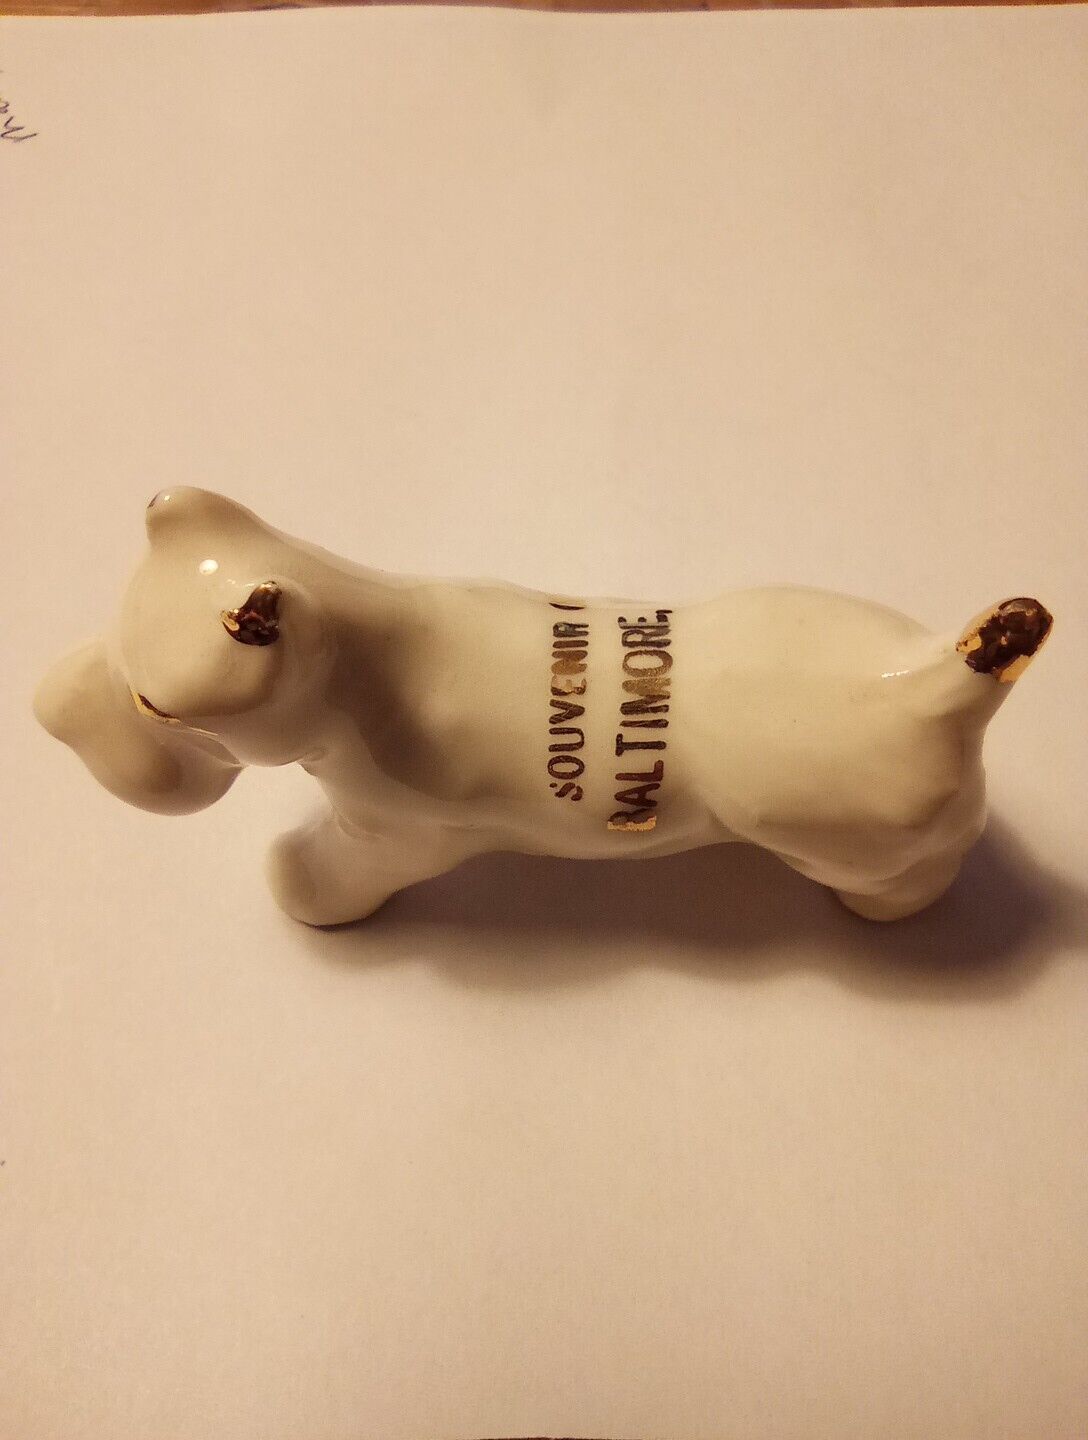 SOUVENIR OF BALTIMORE, MD. LOGO FIGURINE GREAT FOR ANY VINTAGE COLLECTION